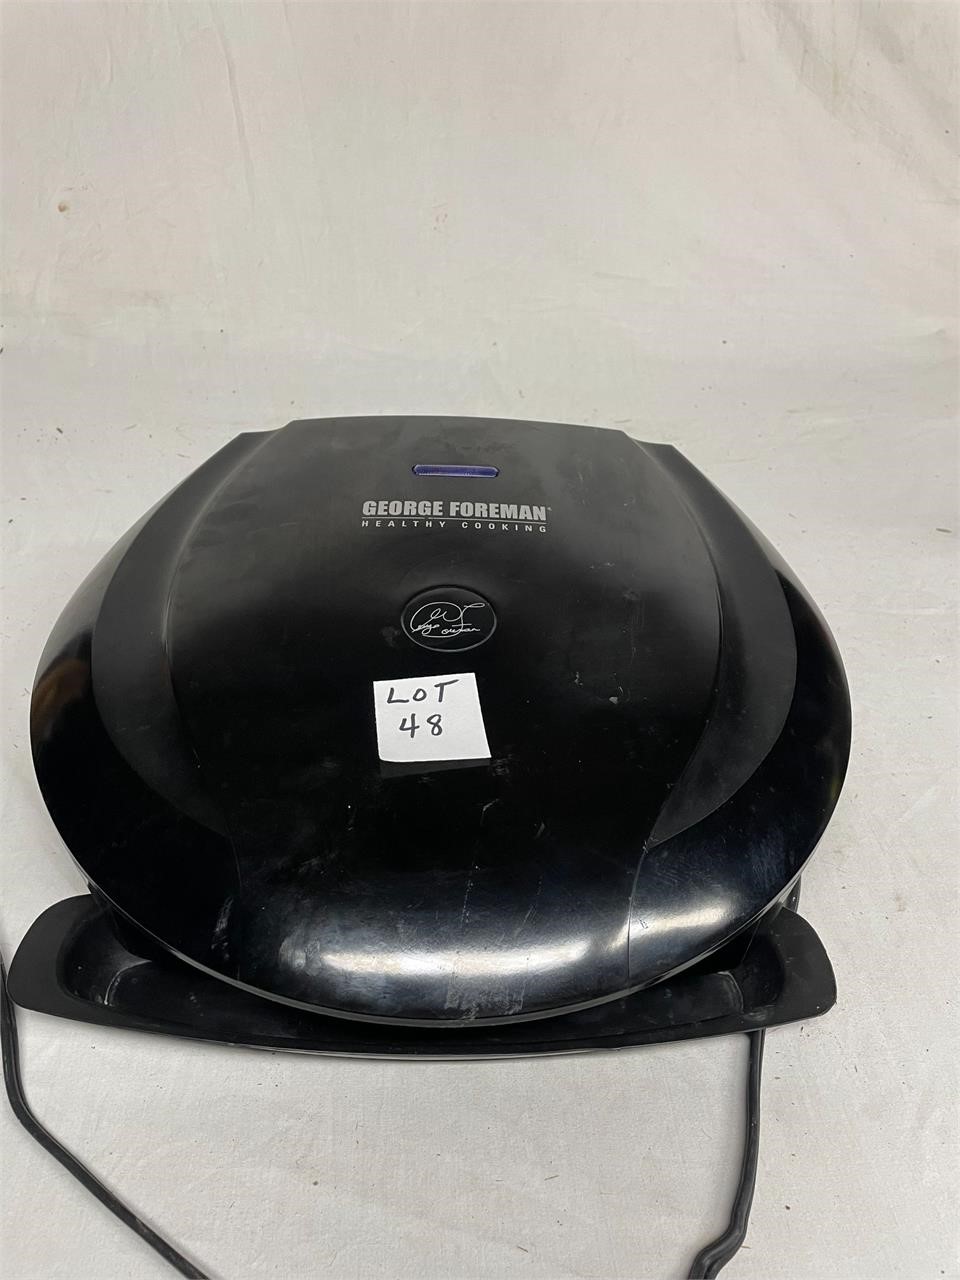 George foreman healthy cooking grill